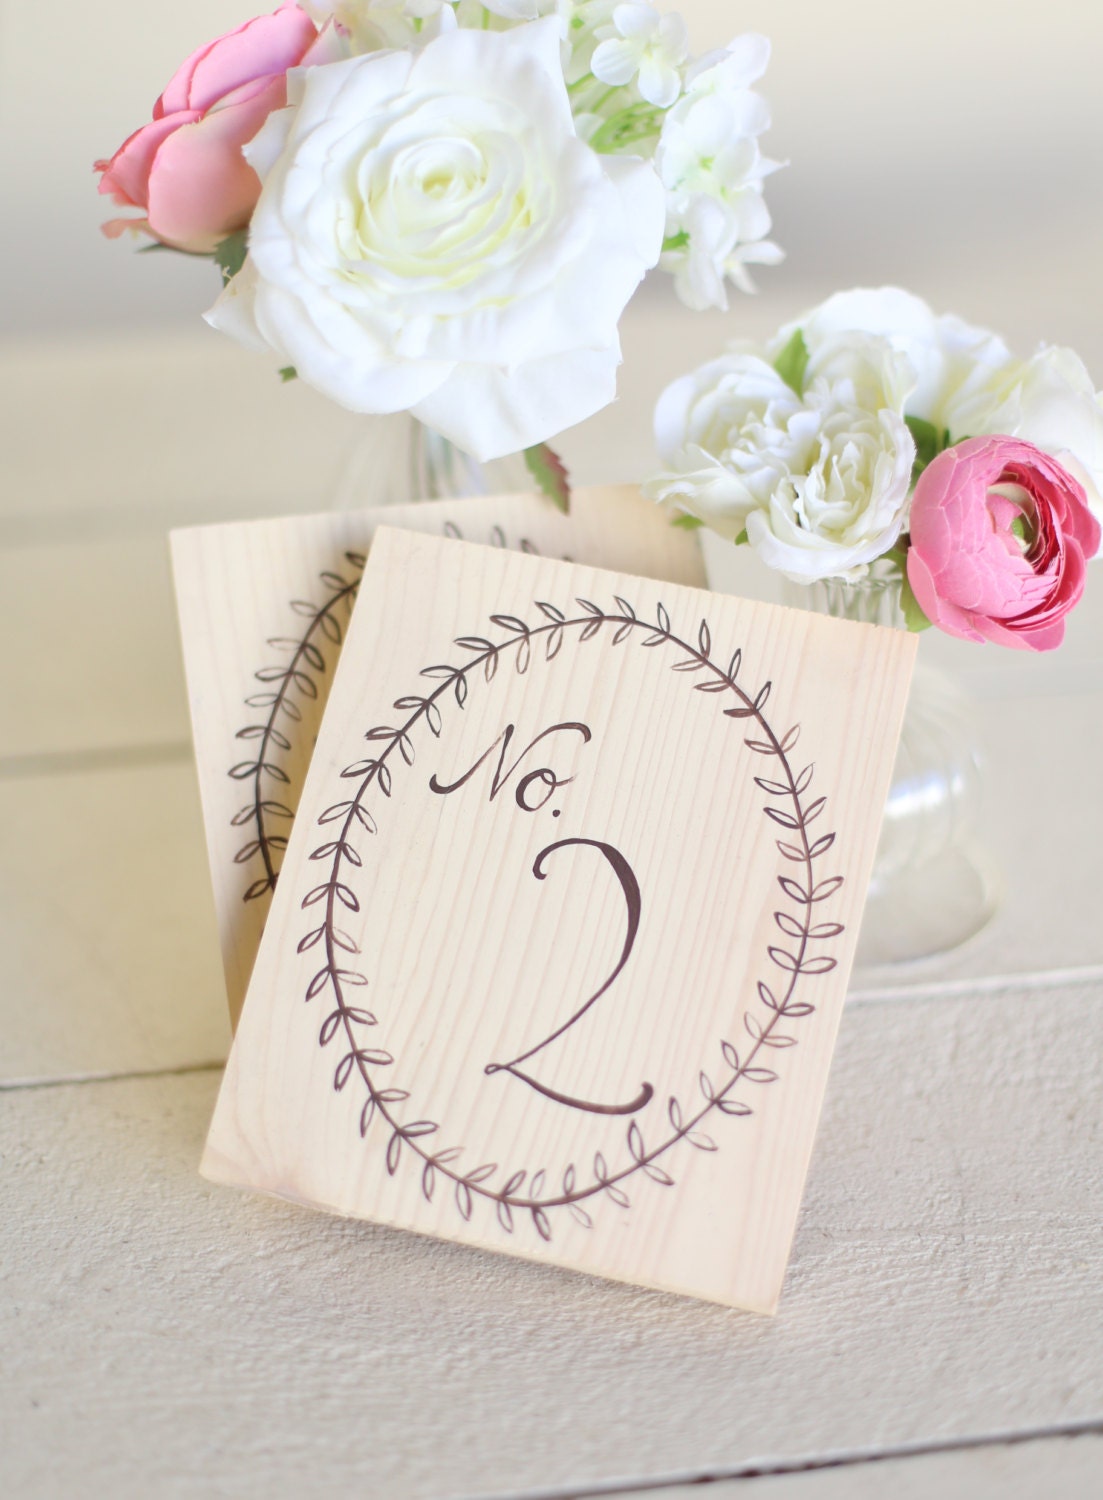 Rustic Chic Table Numbers Laurel Wreath Barn Country Wedding Decor NEW 2014 Design by Morgann Hill Designs